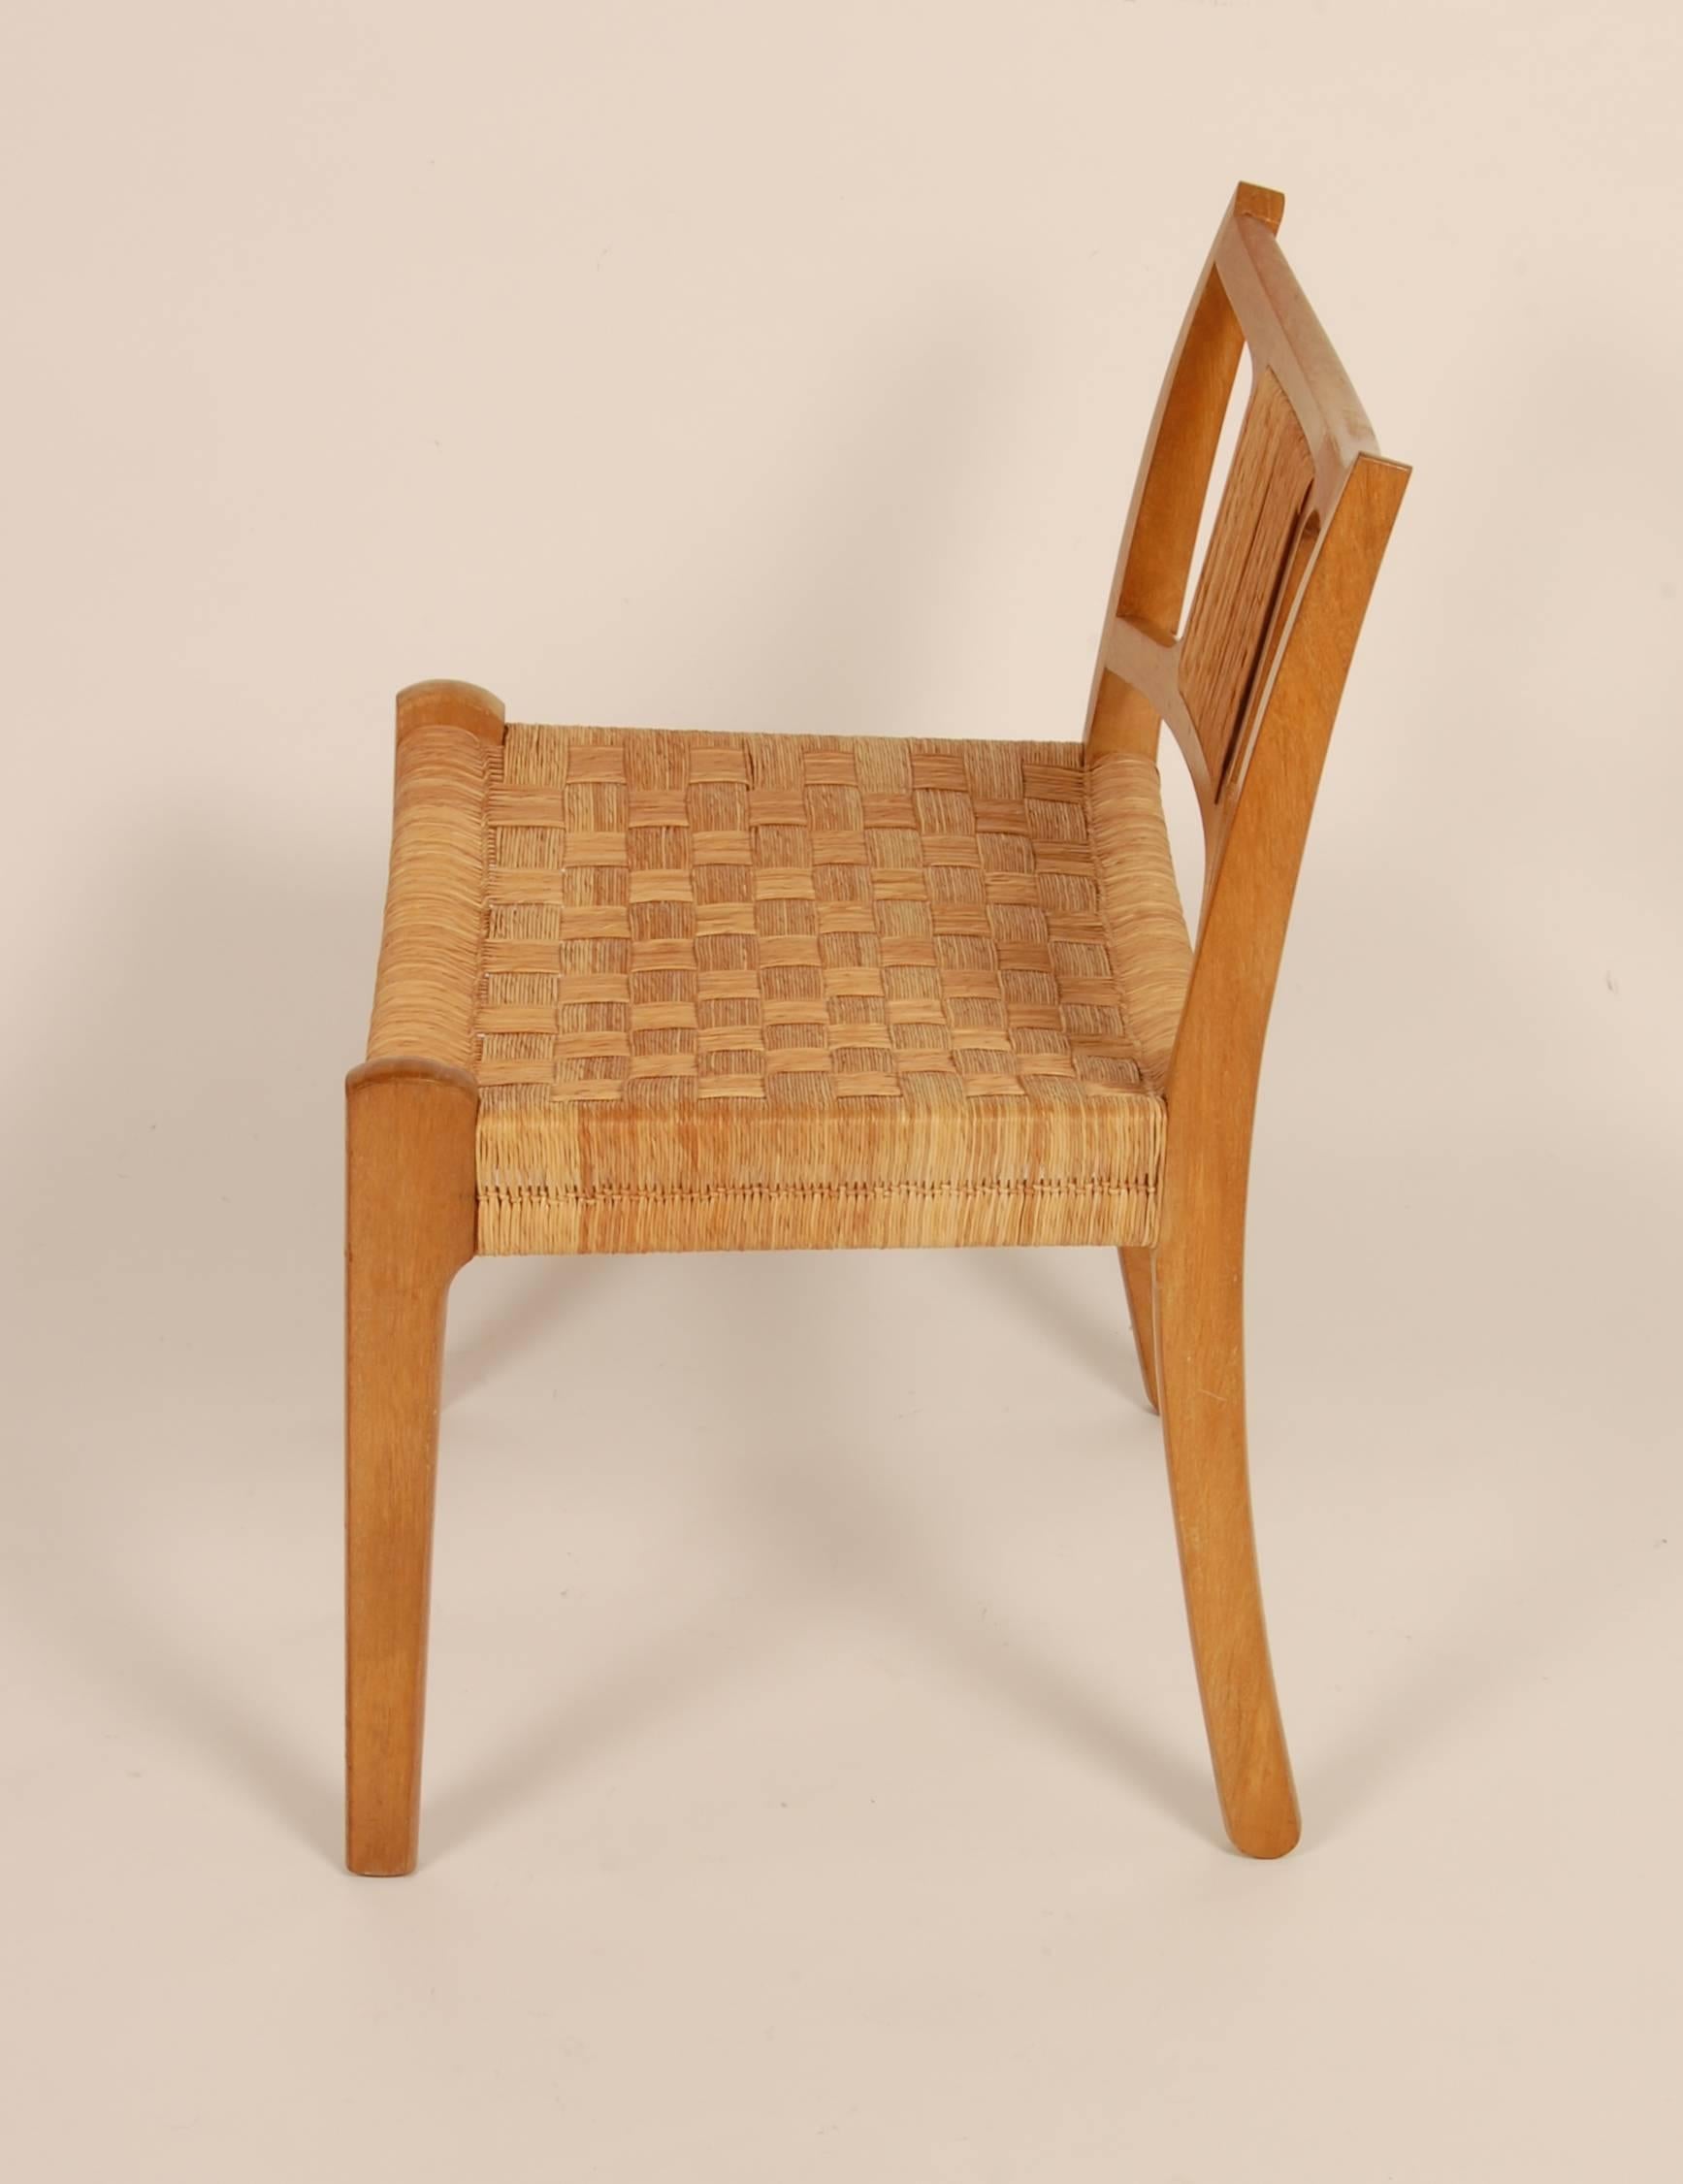 Mid-20th Century Edmond Spence Side Chair for Industria Mueblera of Mexico